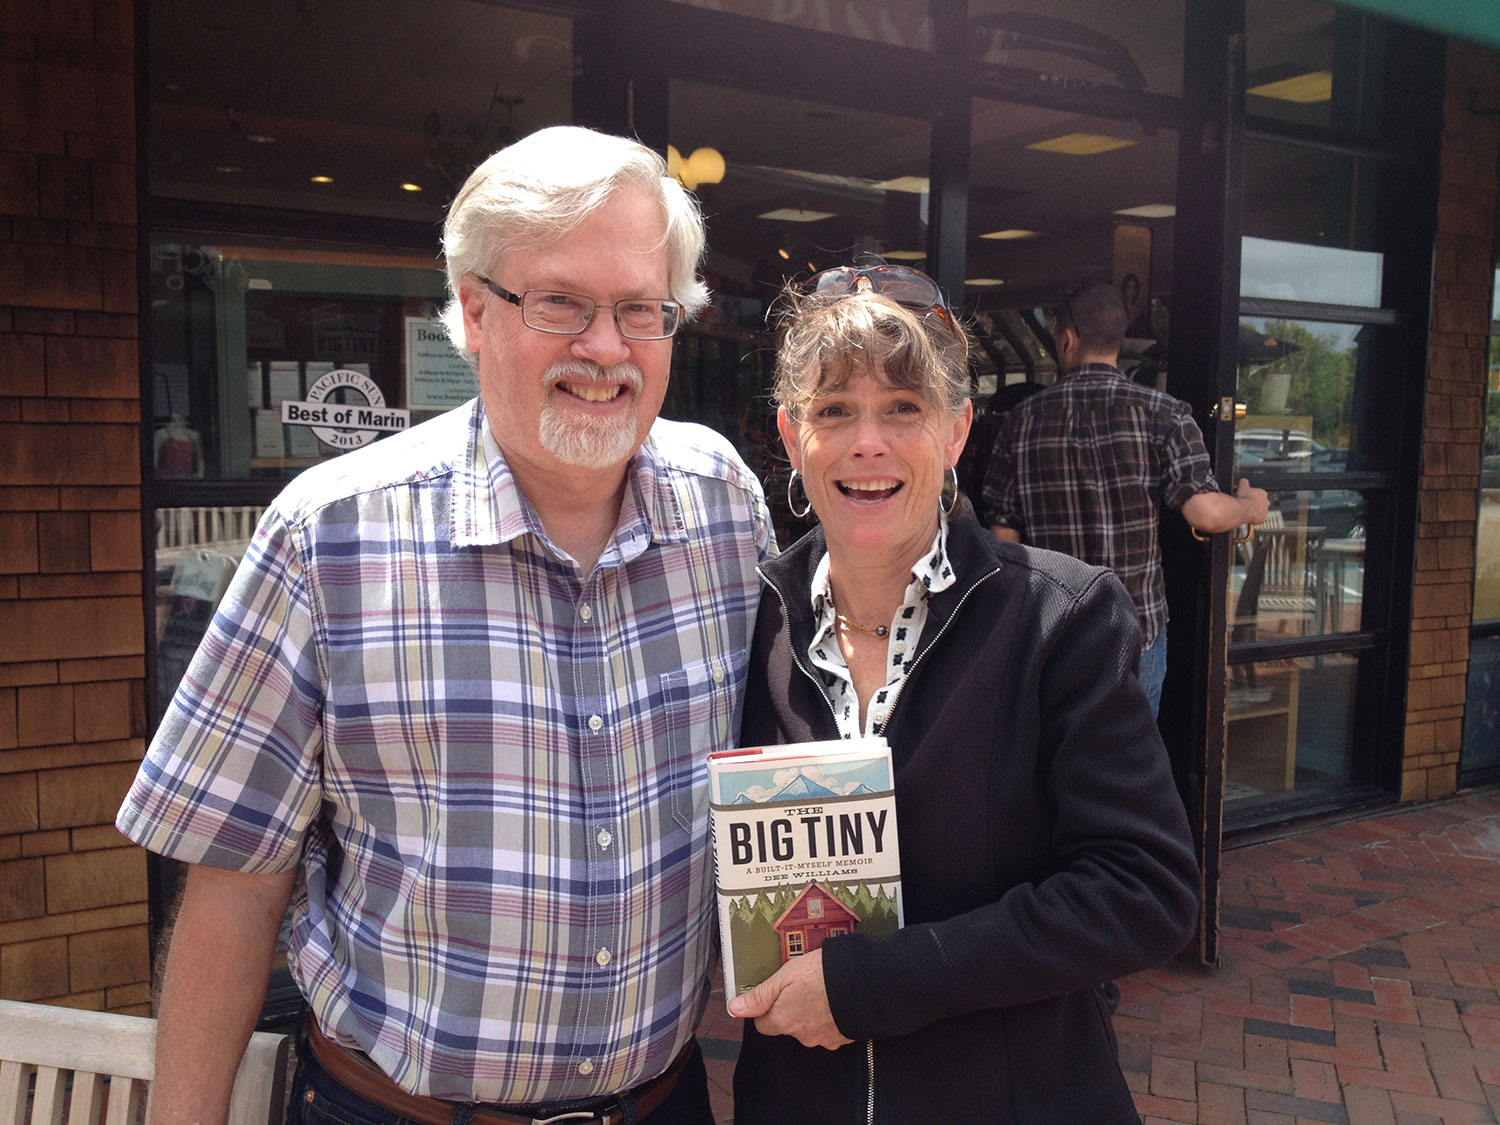 Kent Griswold from Tiny House Blog and Dee Williams from PAD Tiny Houses